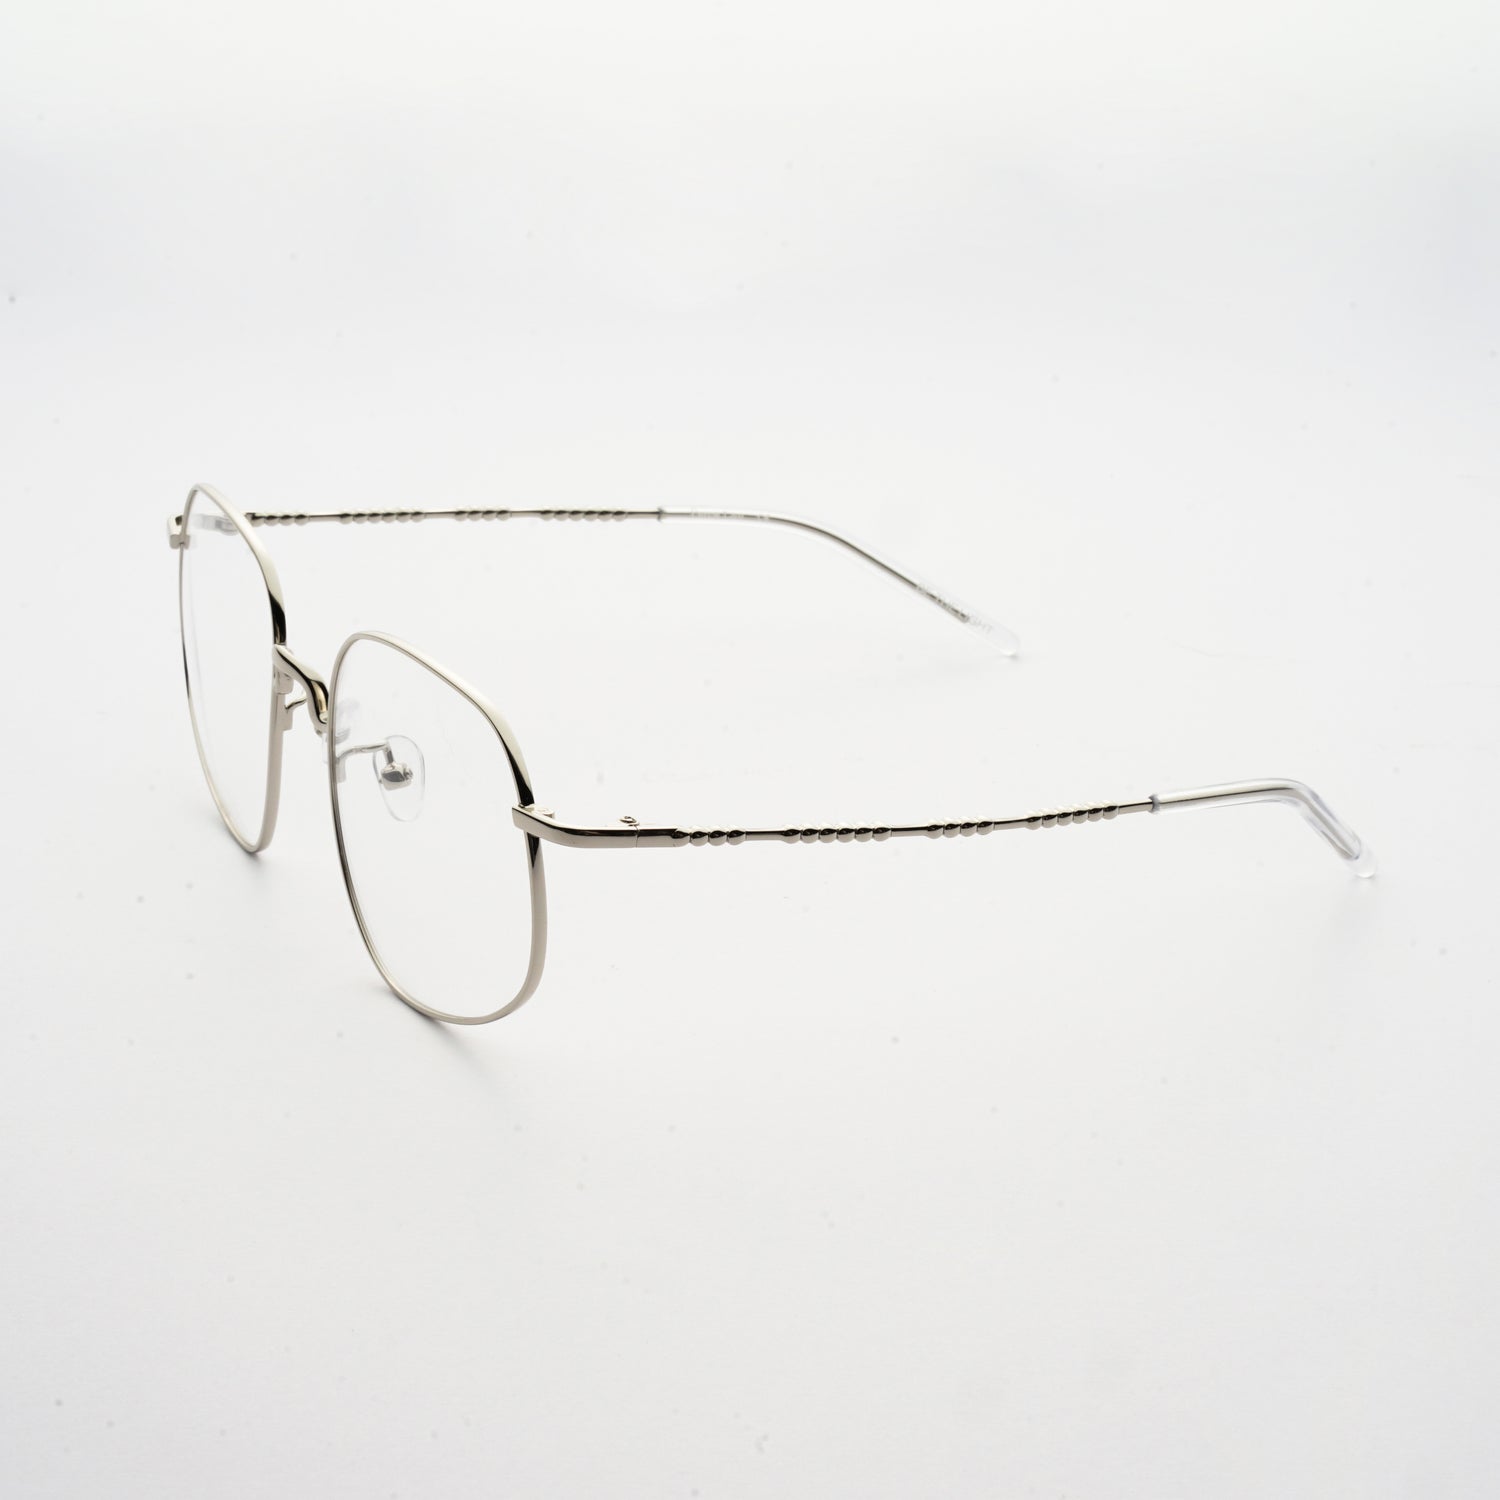 chrome colour stainless steel optical frame with morse code details on the temples 45 angled